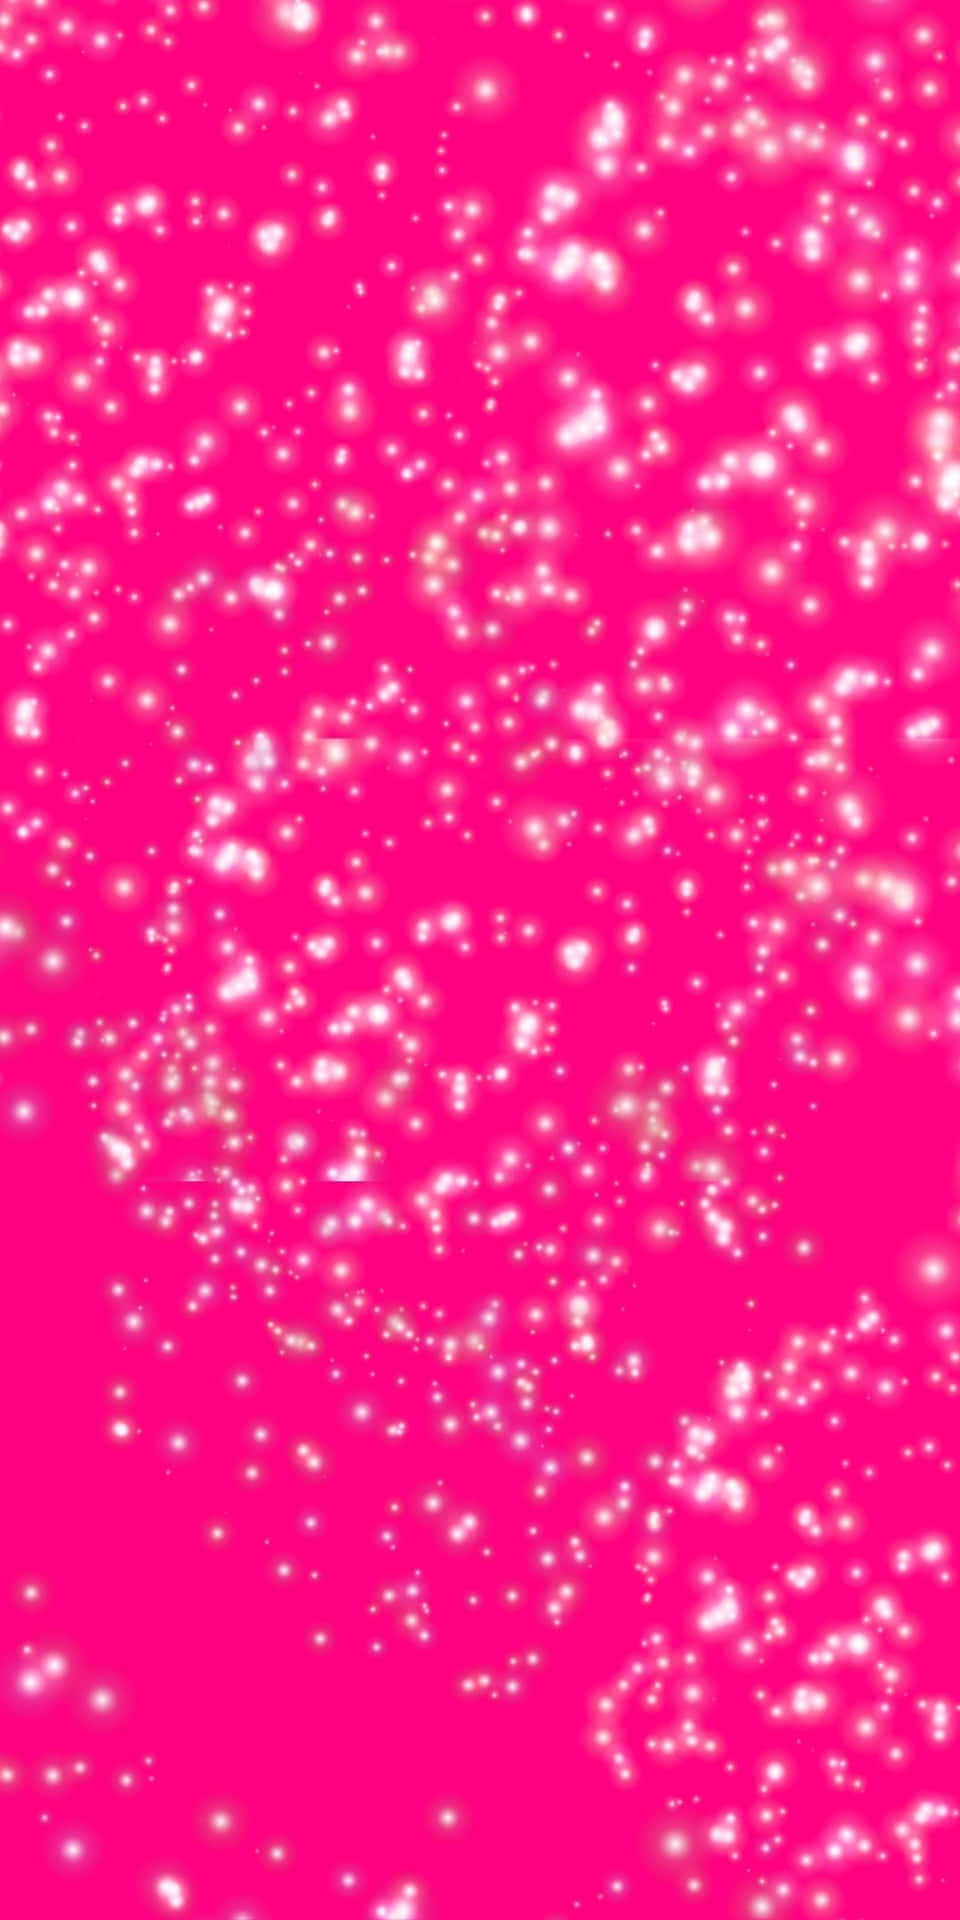 Gorgeous sparkly pink background